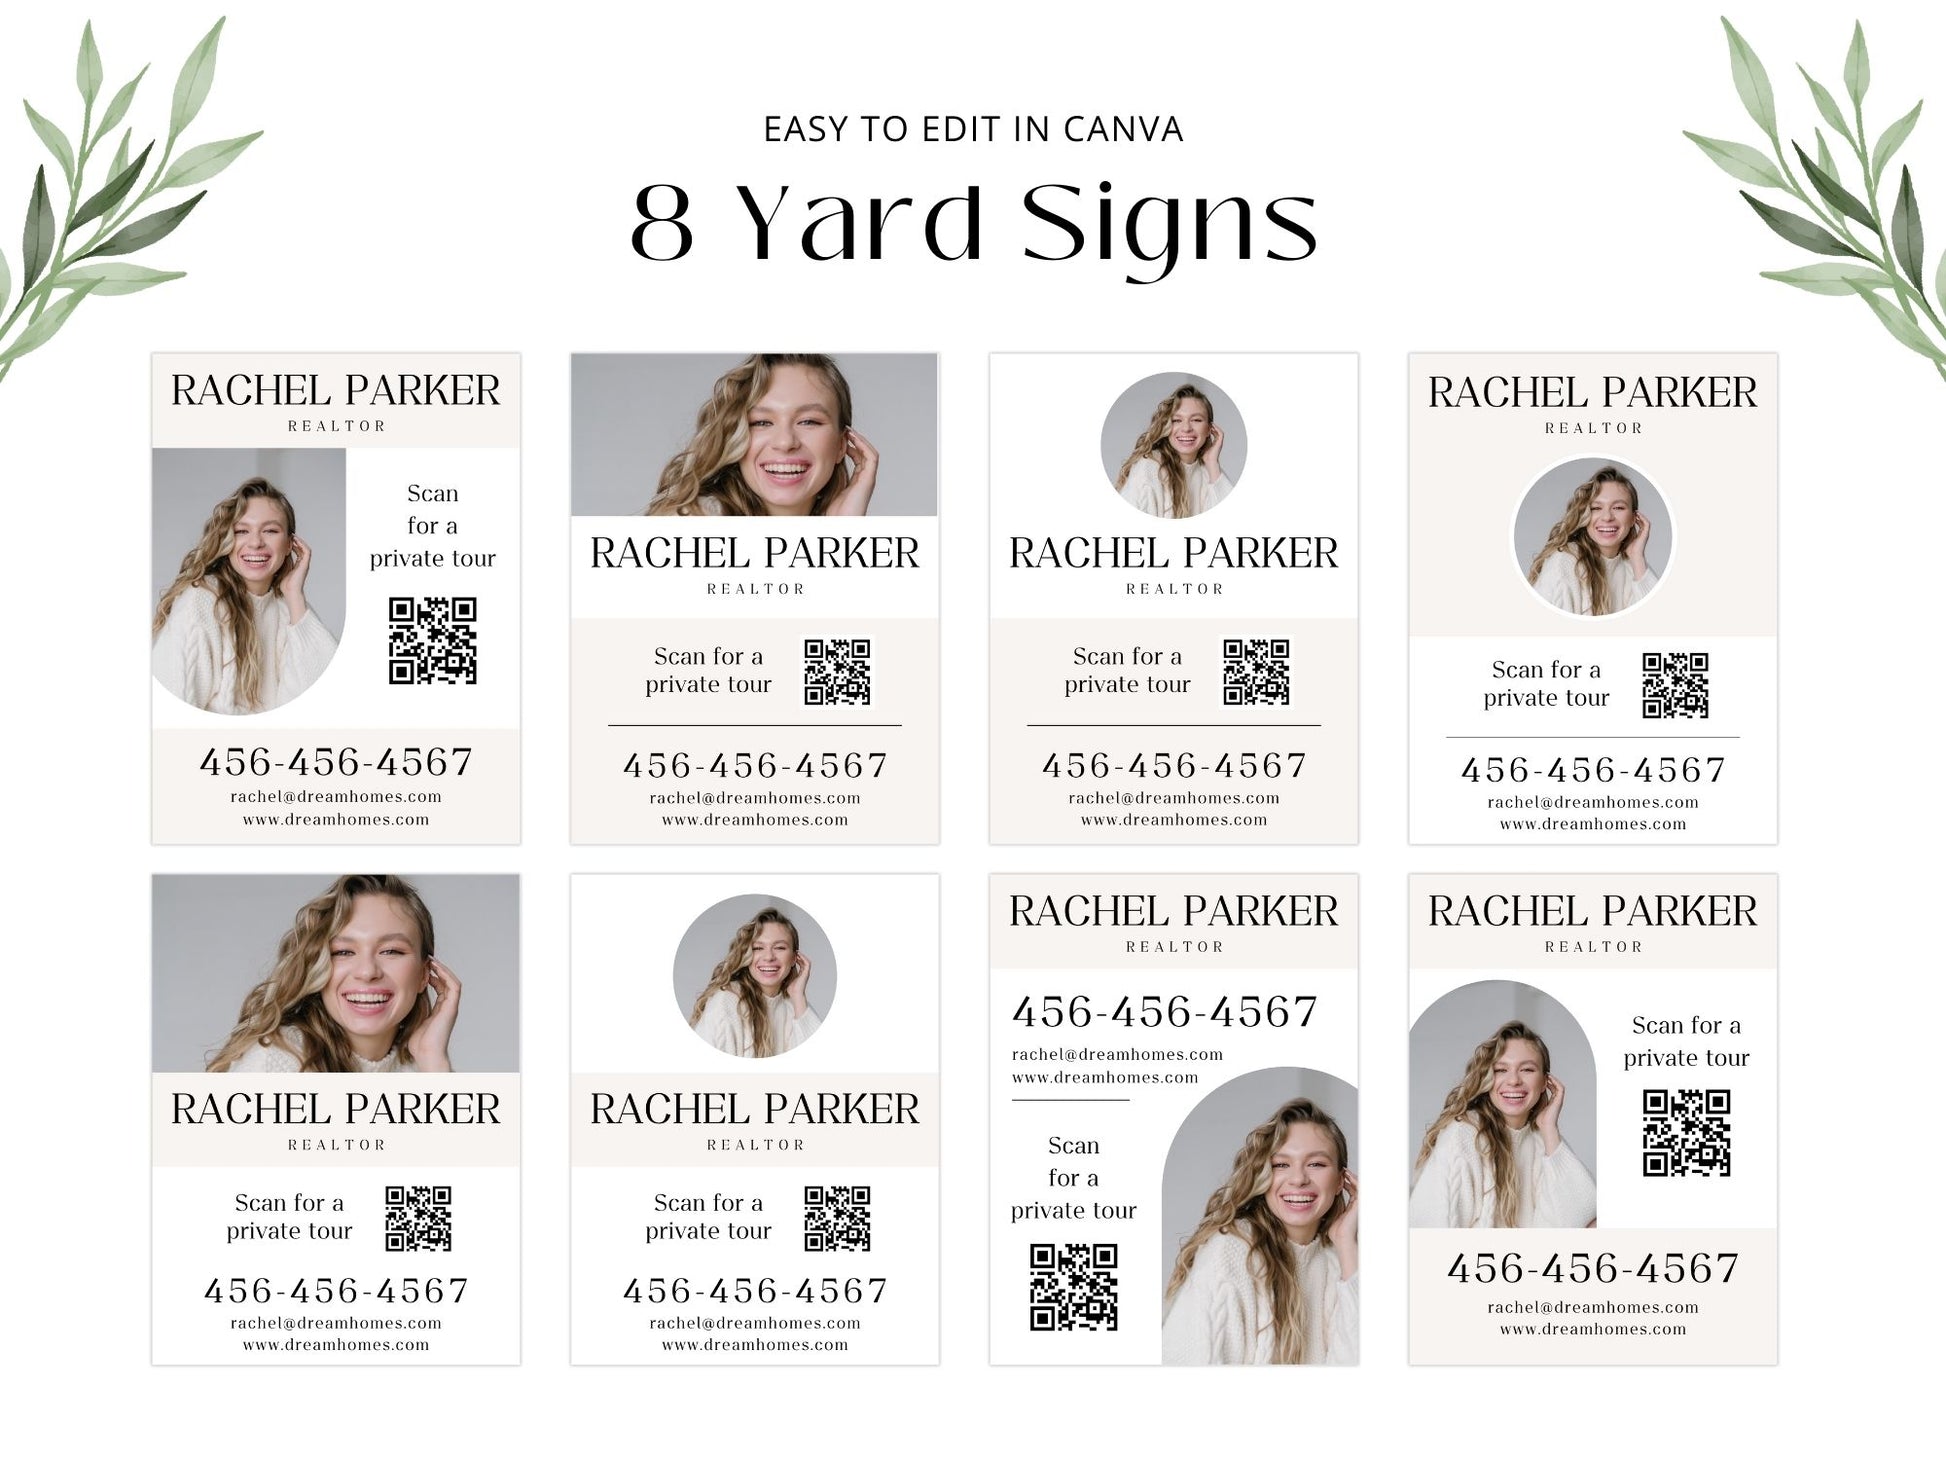 Beige Luxury Yard Signs - Sophisticated yard signs designed for premium real estate listings.